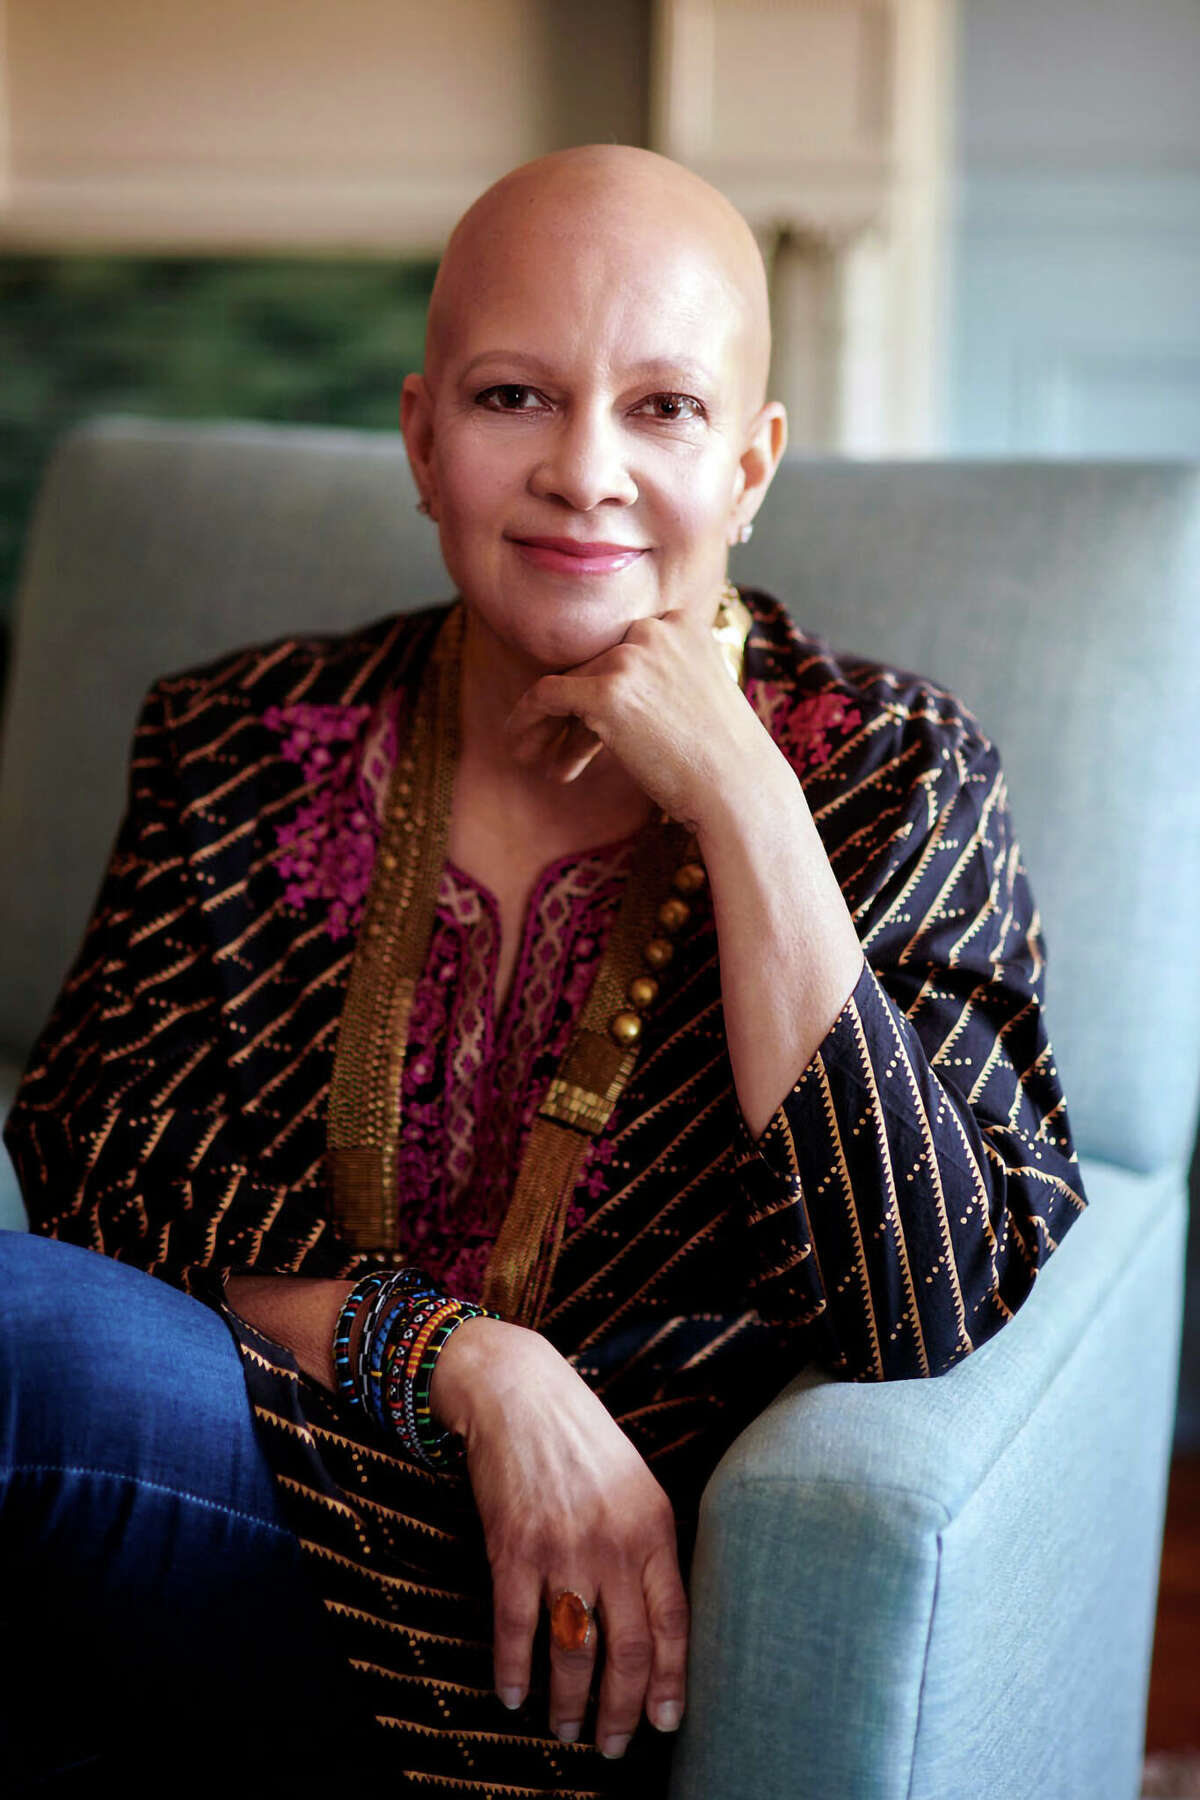 New York-based interior designer Sheila Bridges, author of the memoir "The Bald Mermaid," spoke with comedian Chris Rock for his 2009 documentary "Good Hair" about her hair loss to alopecia areata.